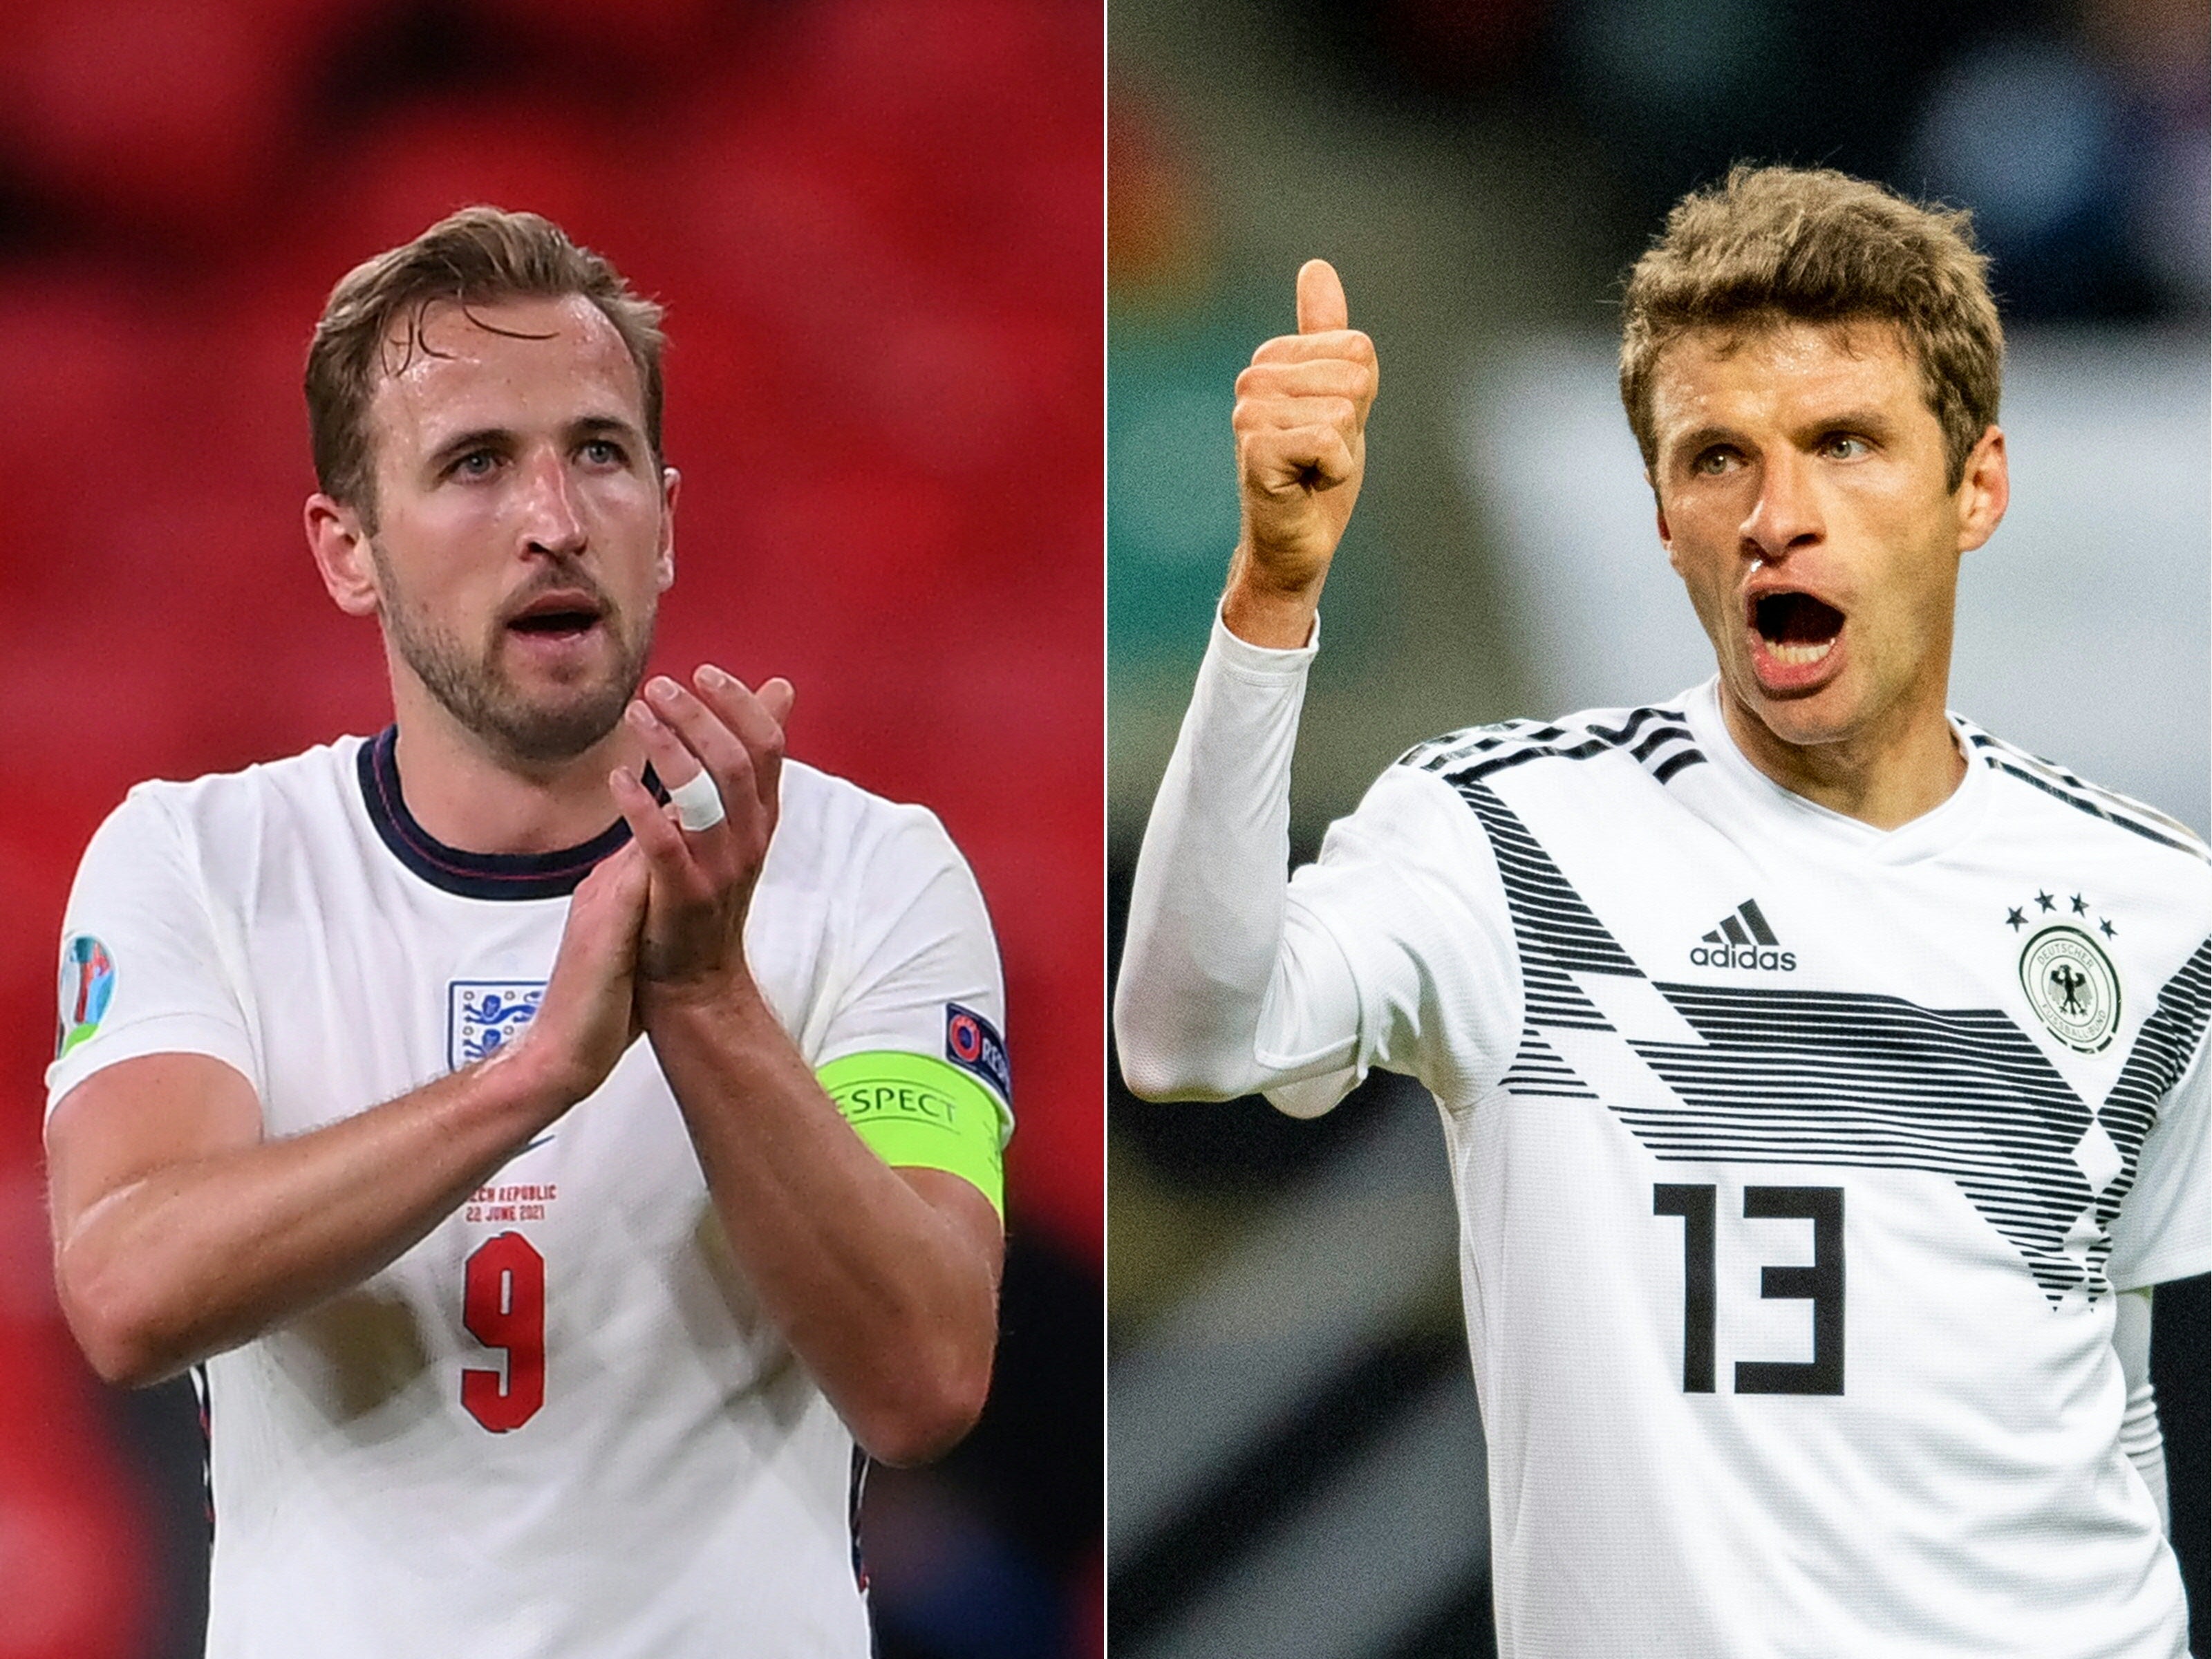 We meet again: England’s Harry Kane and Germany’s Thomas Muller